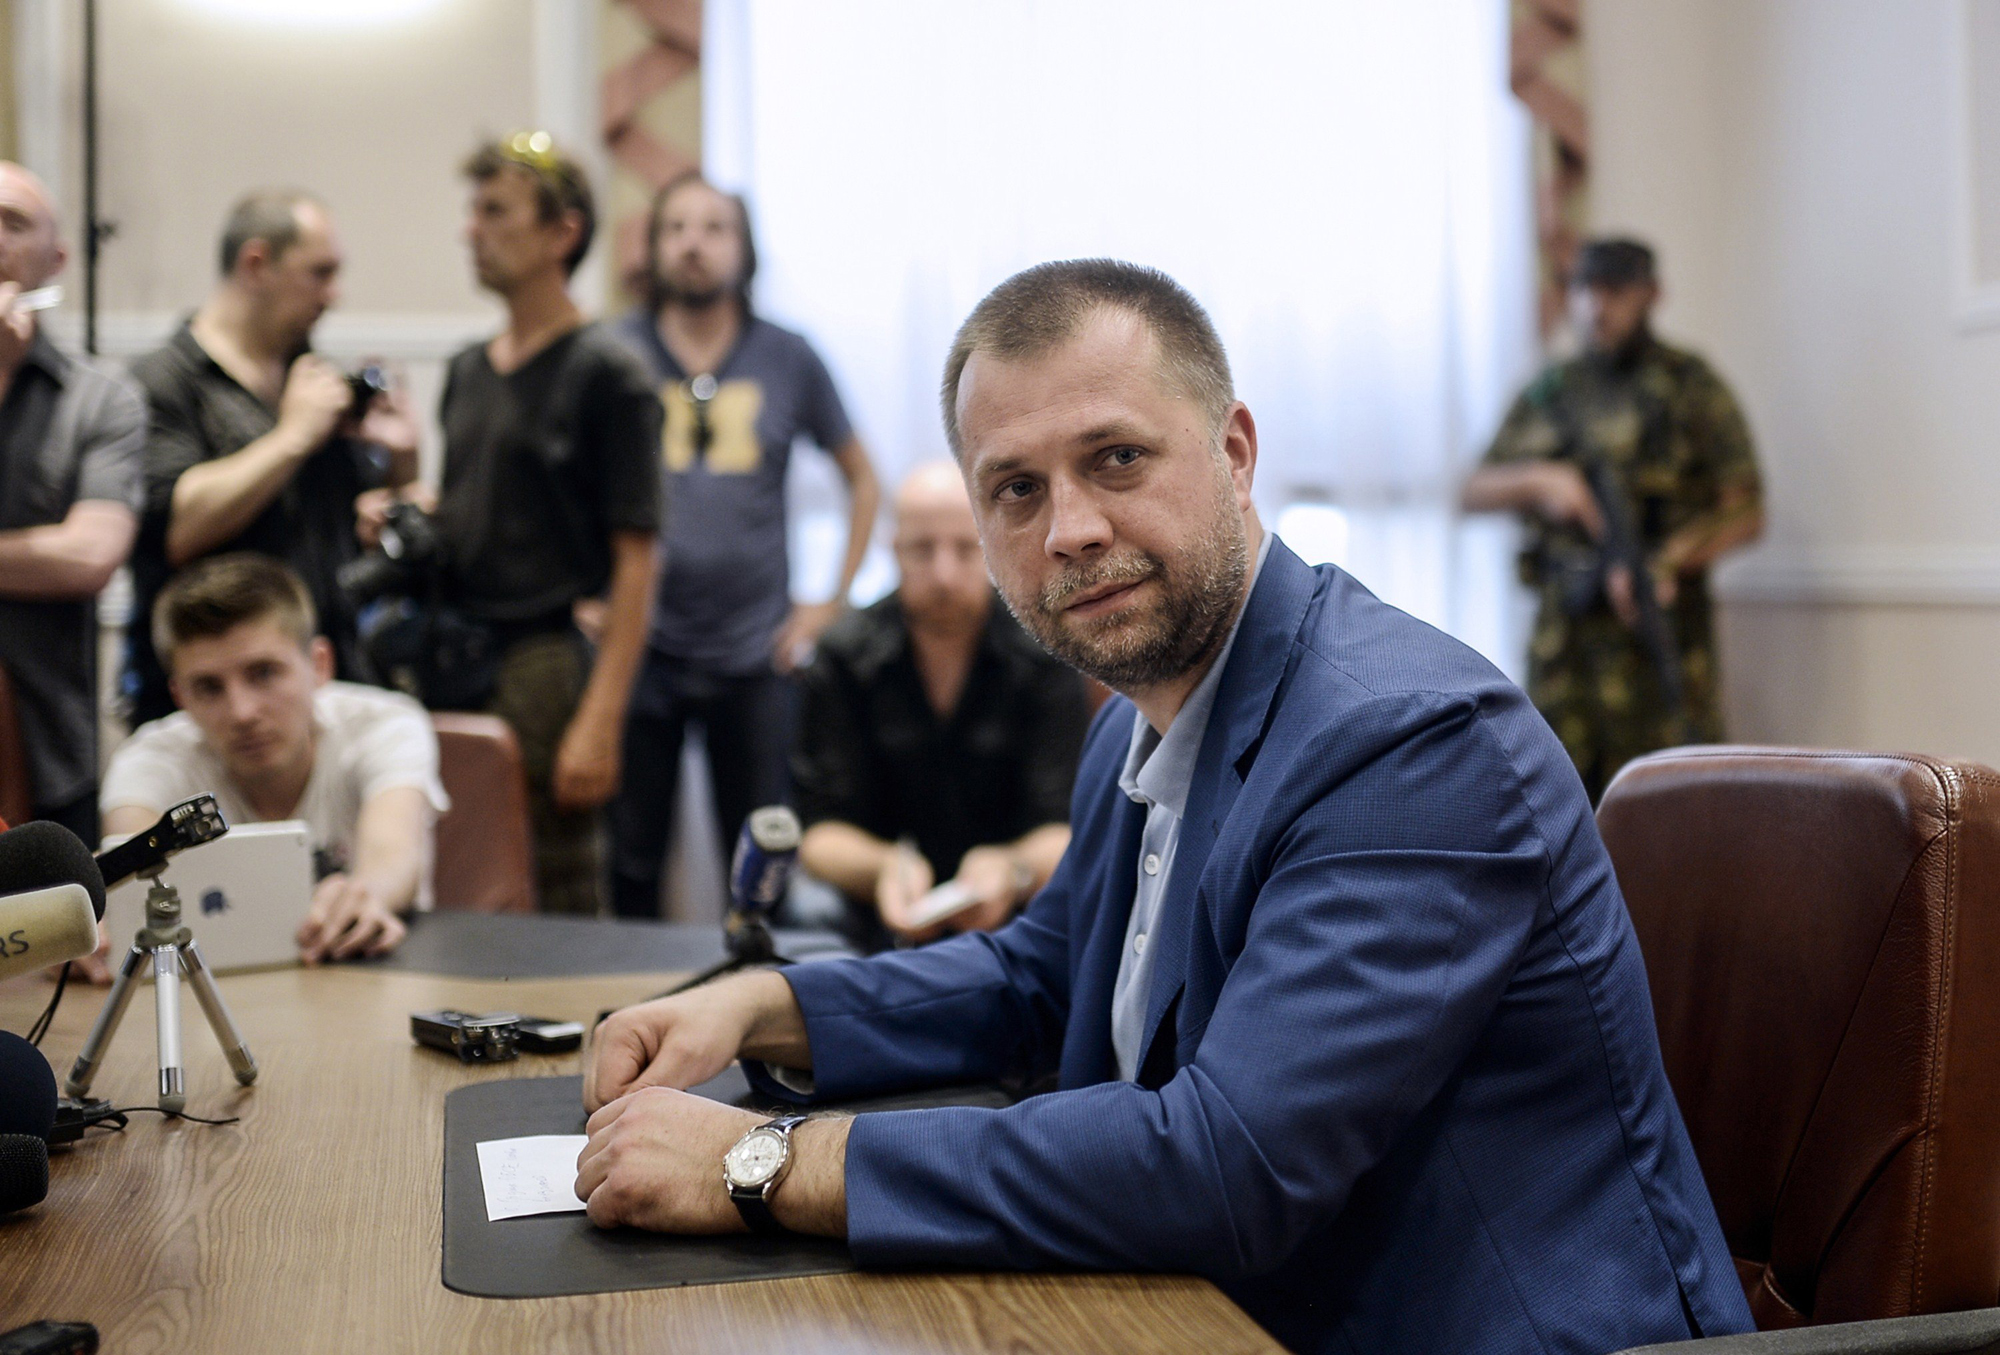 Self-proclaimed Prime Minister of the pro-Russian separatist "Donetsk People's Republic" Alexander Borodai gives a press conference in Donetsk, July 19, 2014. (Bulent Kilic—AFP/Getty Images)